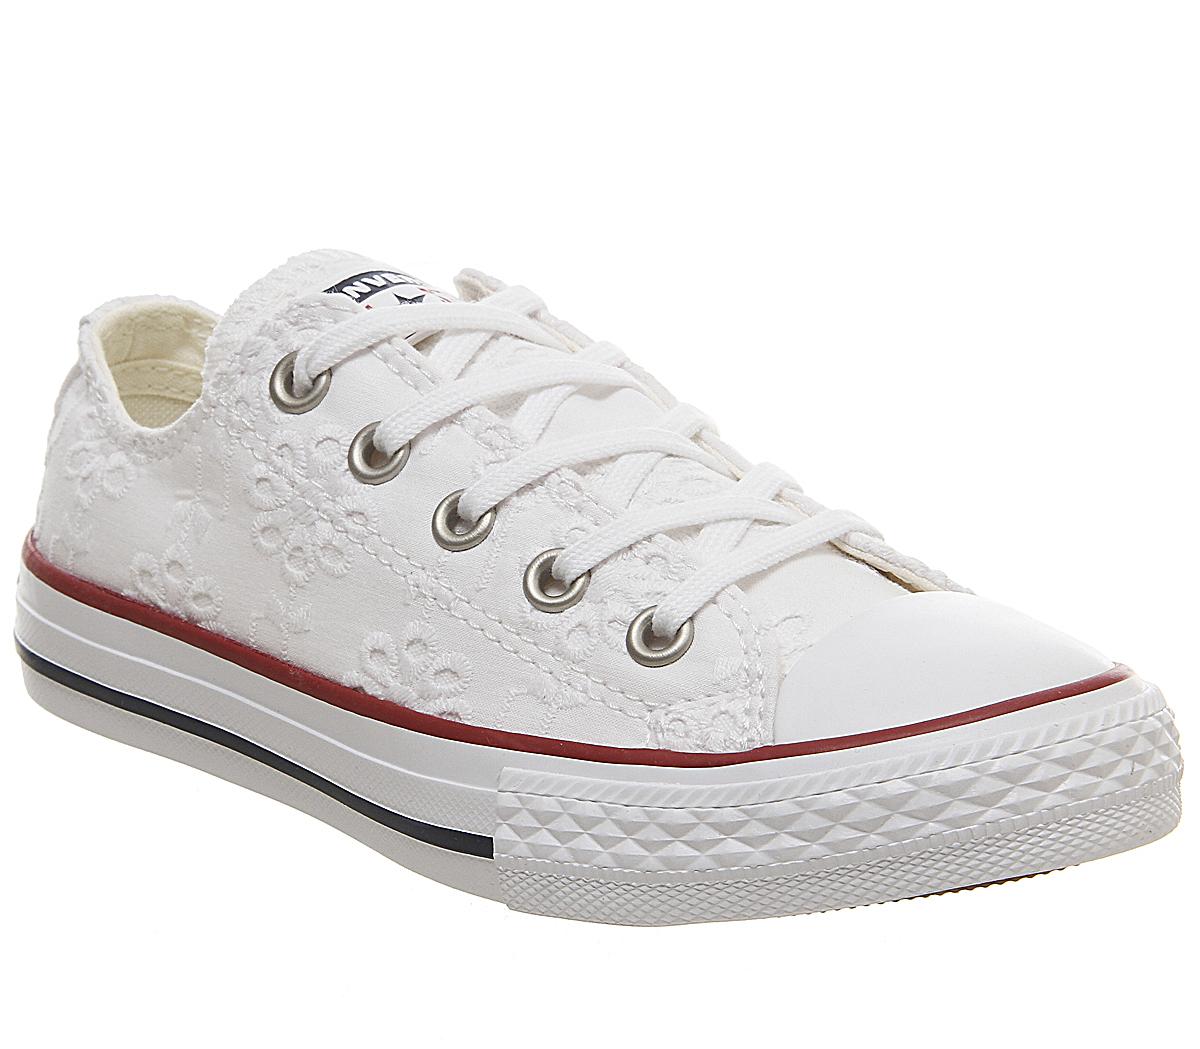 ConverseAll Star Low Youth TrainersWhite Garnet Midnight Navy Lace Flower